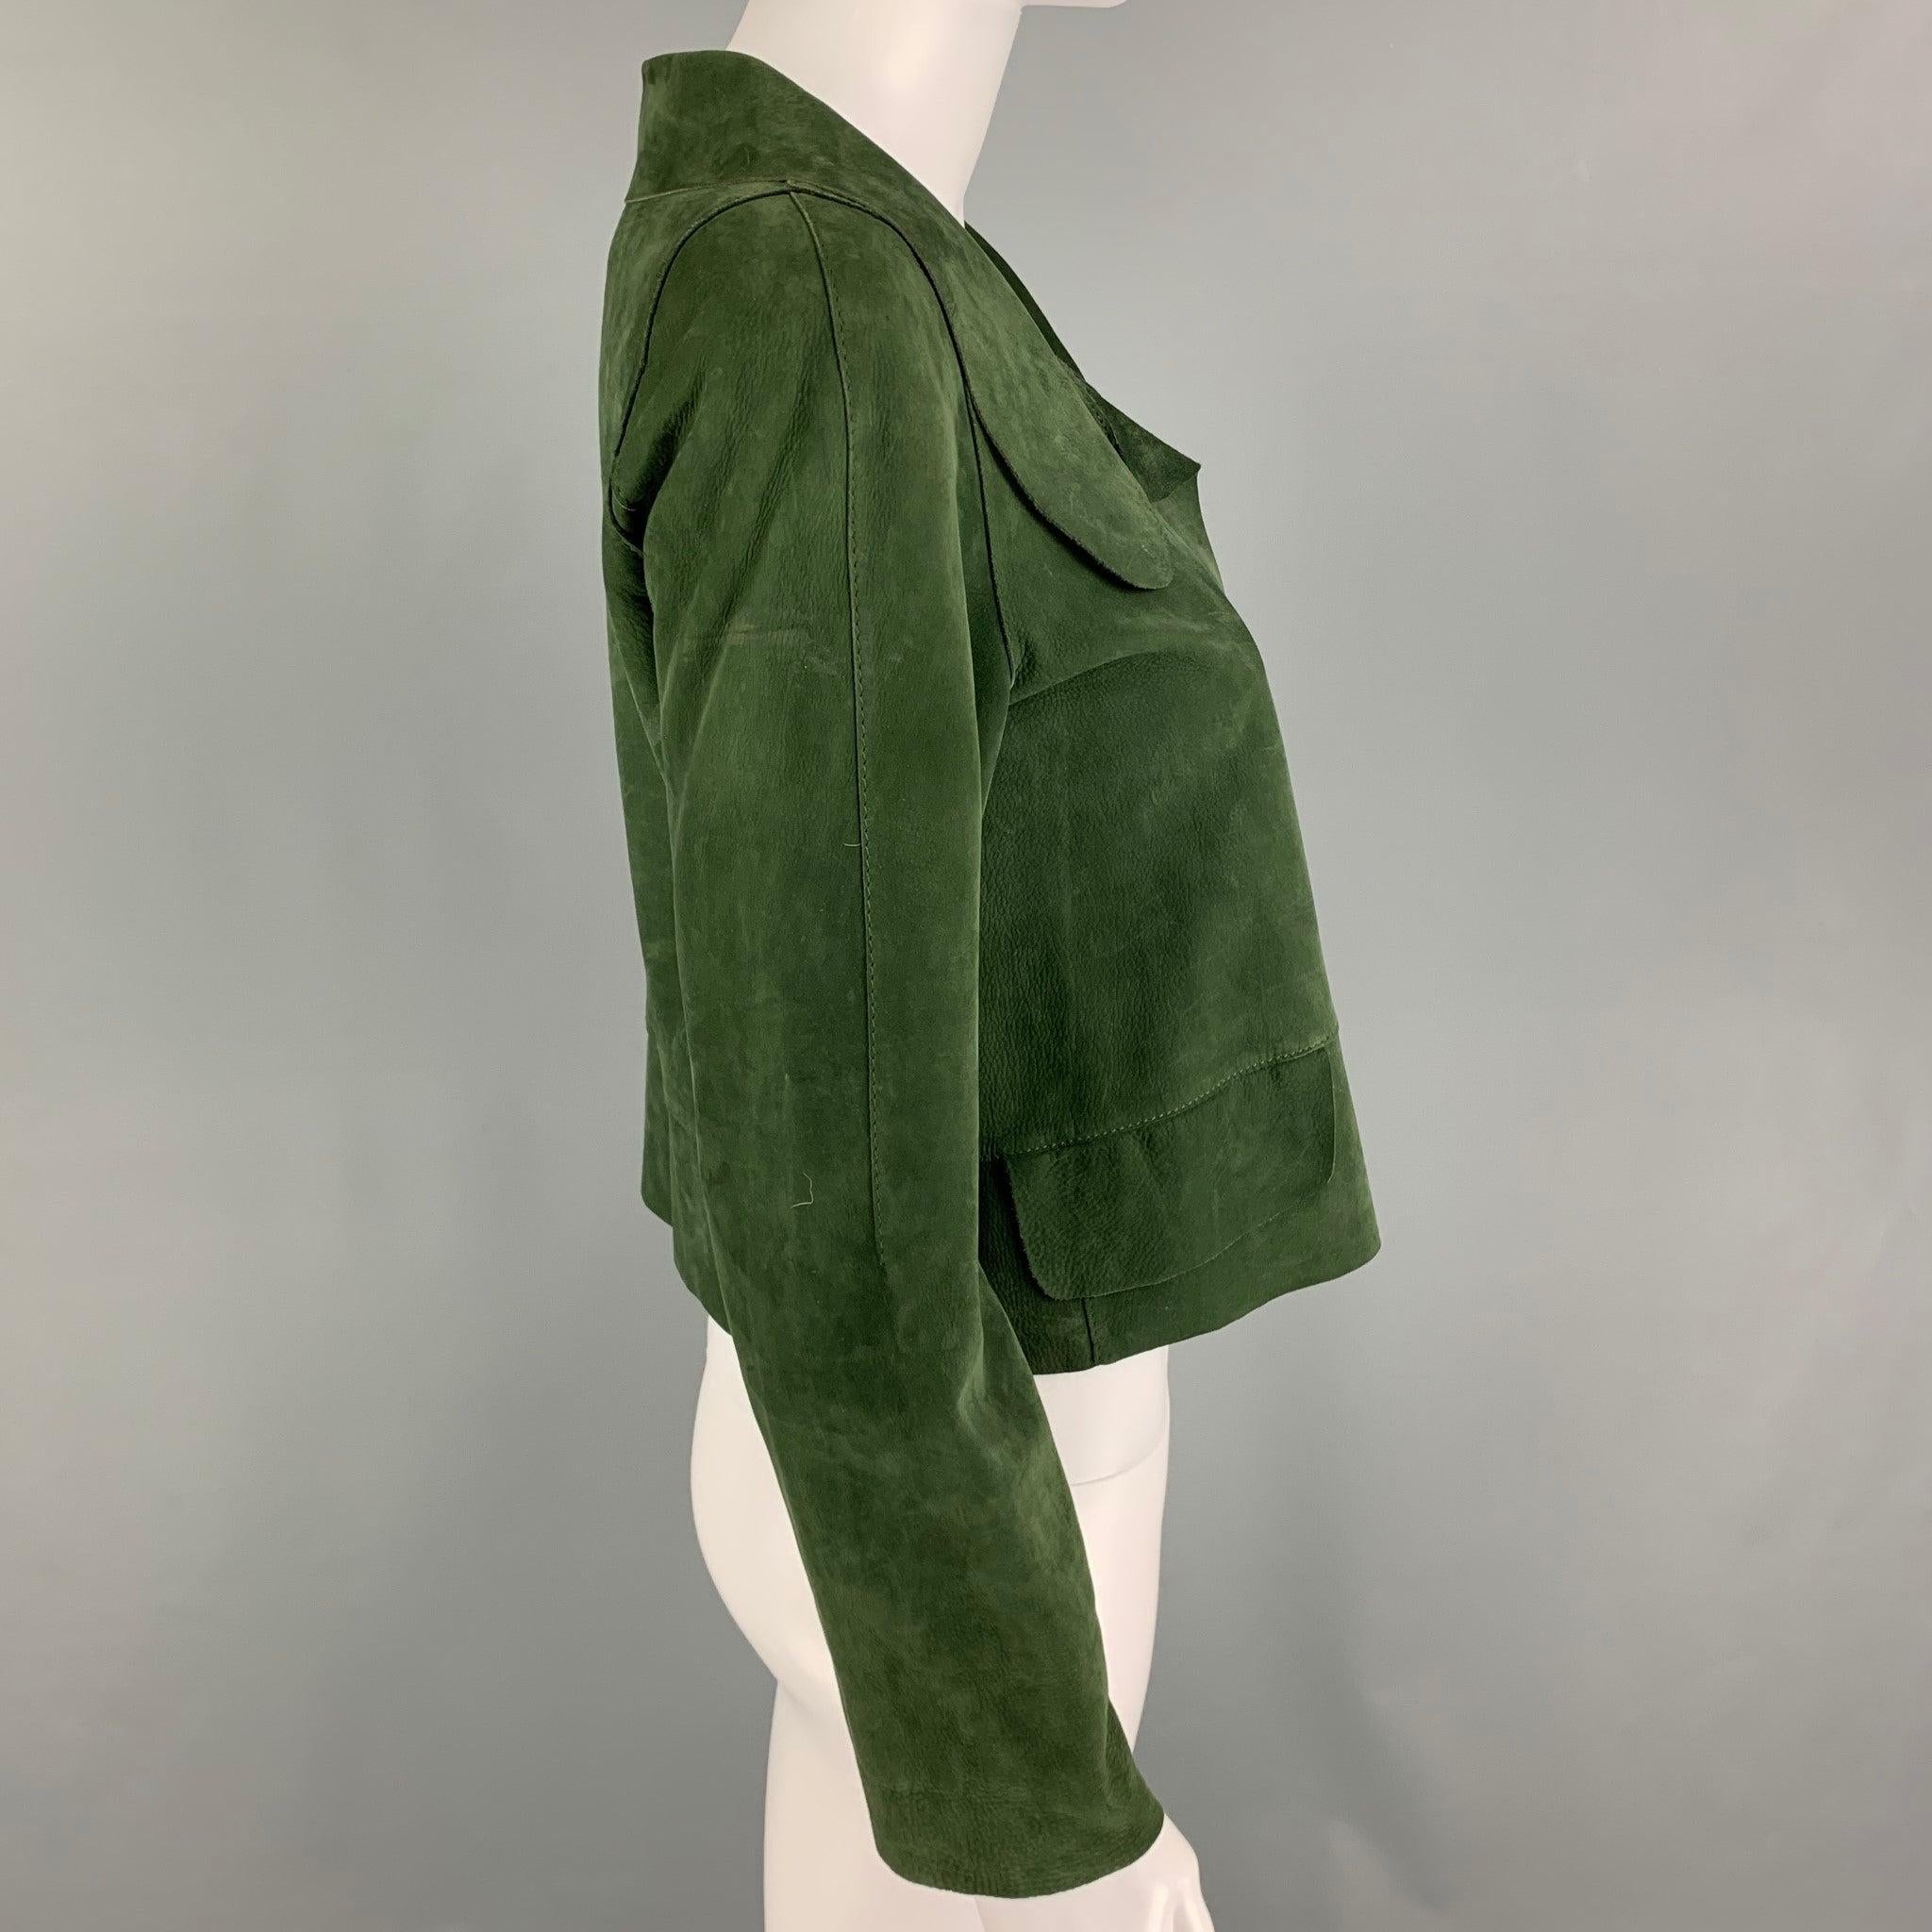 MARNI jacket comes in a green suede featuring a spread collar, flap pockets, and a single snap button closure.
Very Good
Pre-Owned Condition. Moderate discoloration throughout. Logo & Fabric tag removed. As-is.  

Marked:   40 

Measurements: 
